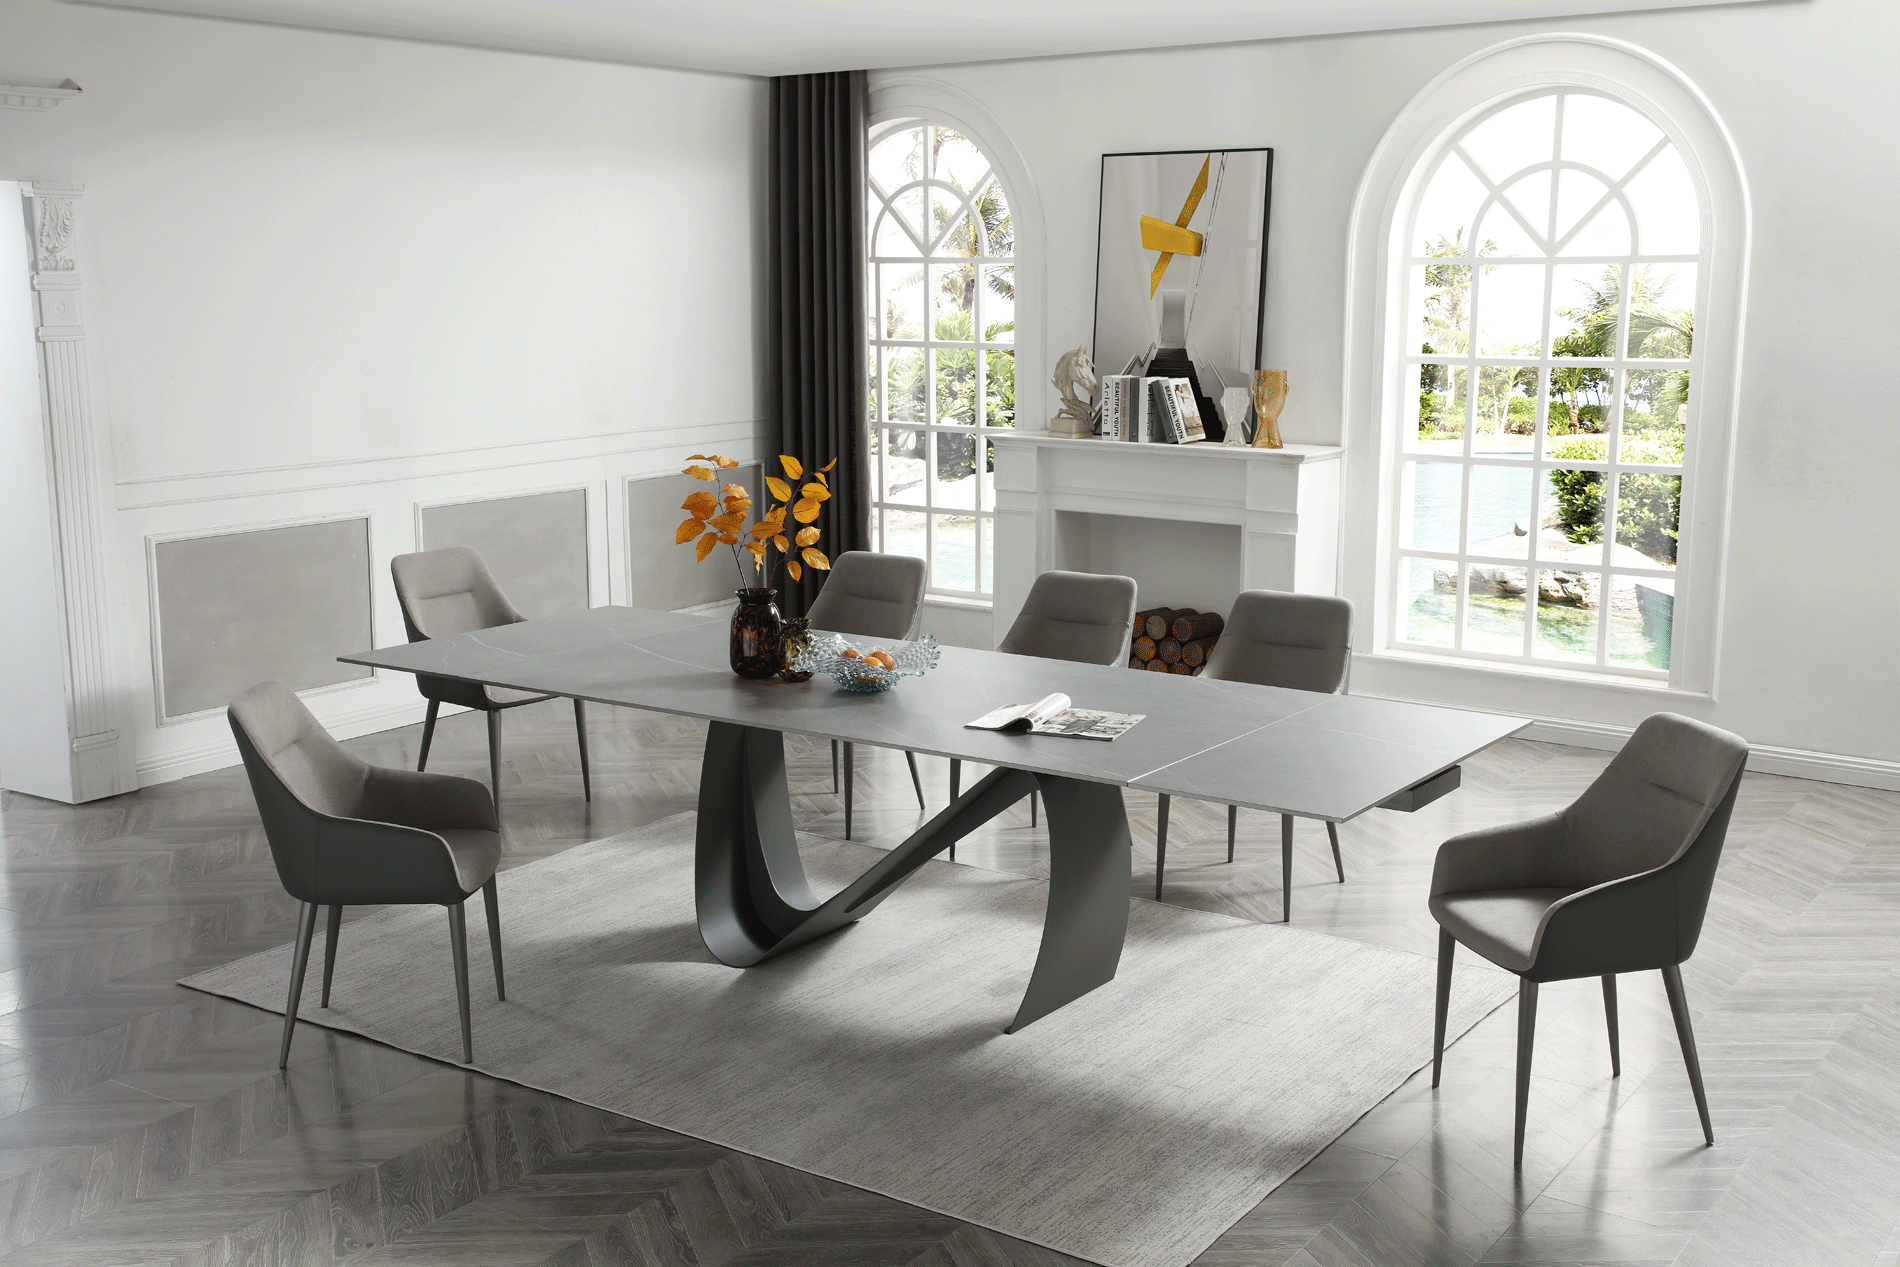 Brands CutCut Vintage Rug Collection Spain 9087 Table Dark grey with 1254 chairs